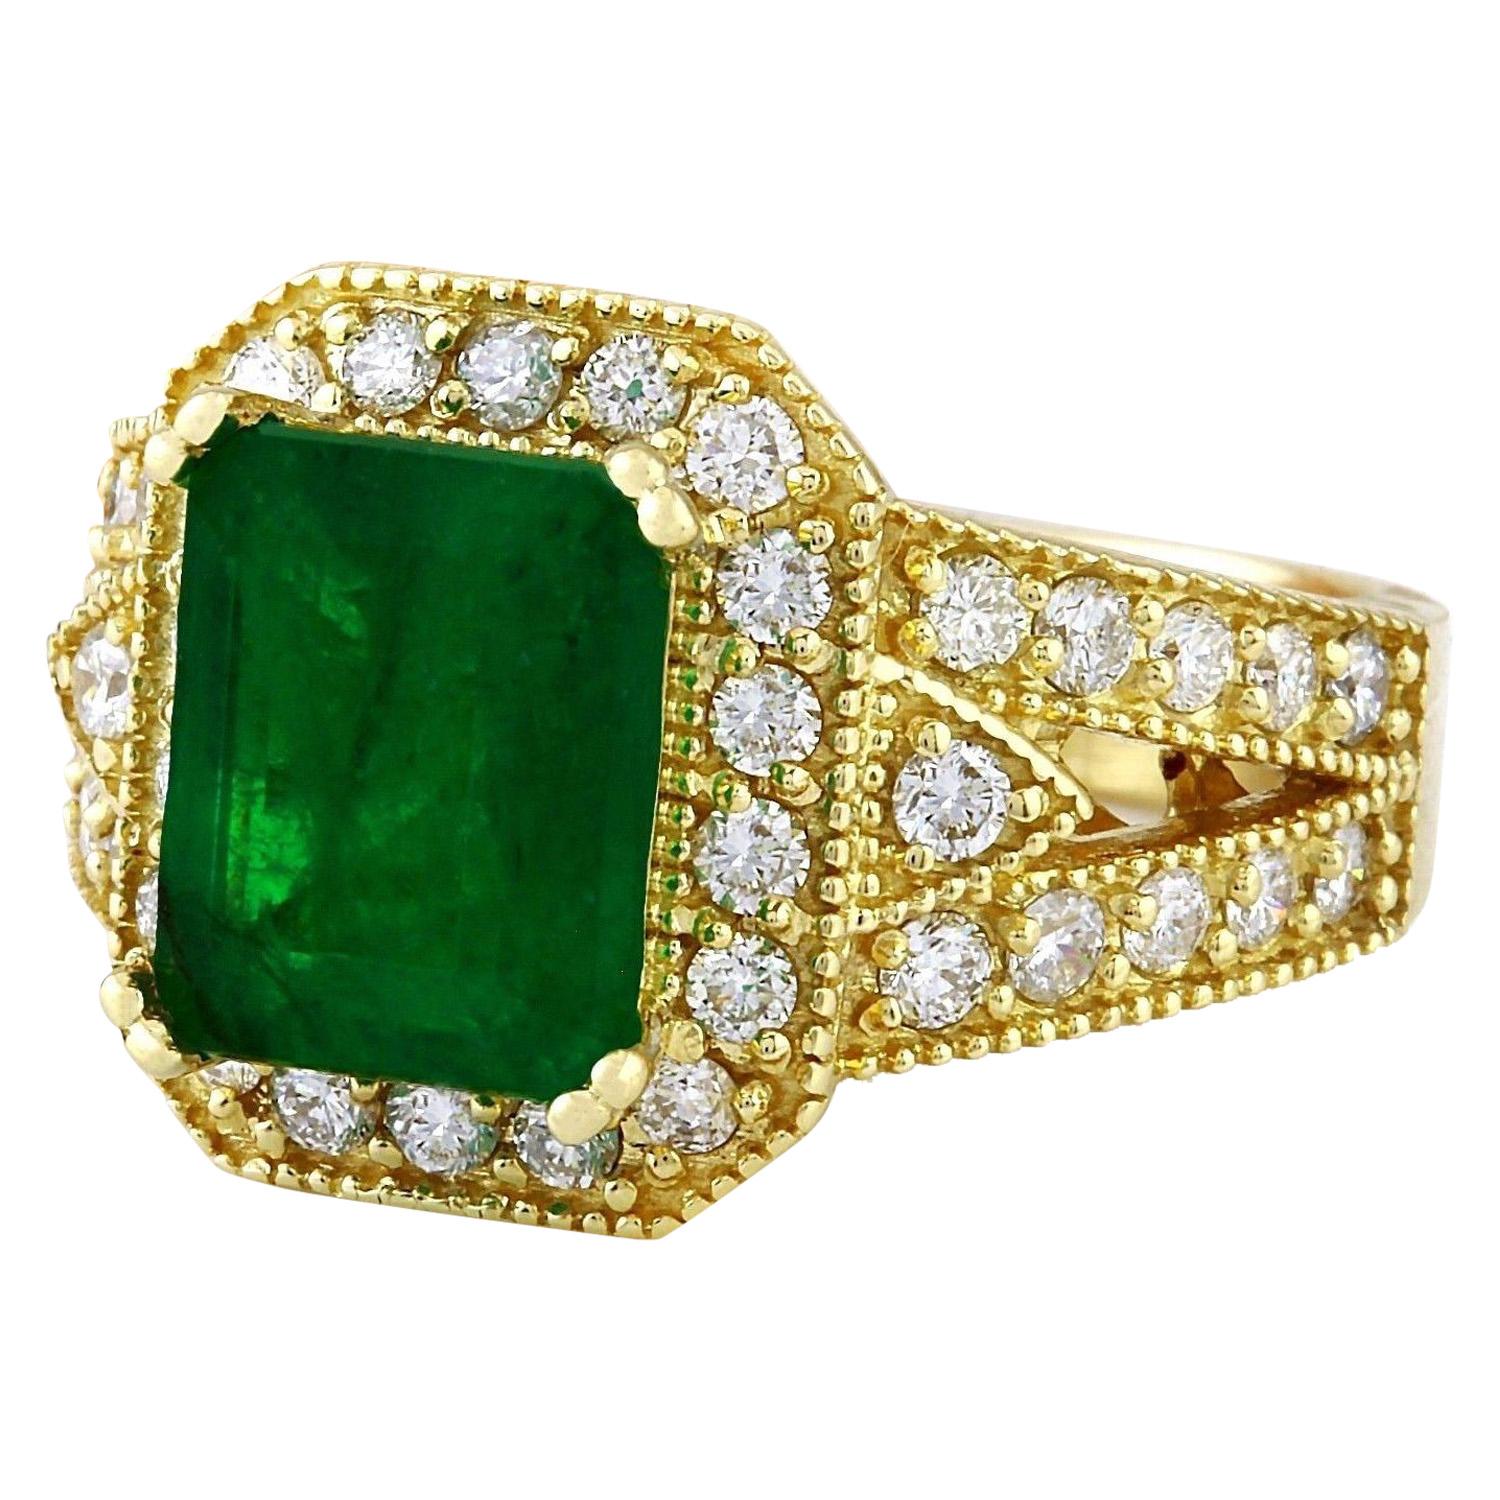  Material: 14K Yellow Gold
 Mainstone: Emerald
 Stone Color: Green
 Stone Weight: 3.15 Carat
 Stone Shape: Emerald
 Stone Quantity: 1
 Stone Dimensions Approx: 10.00x8.00 mm
 Stone Creation Method: Natural
 Stone Treatment Method: Oiled 
 Diamonds:
